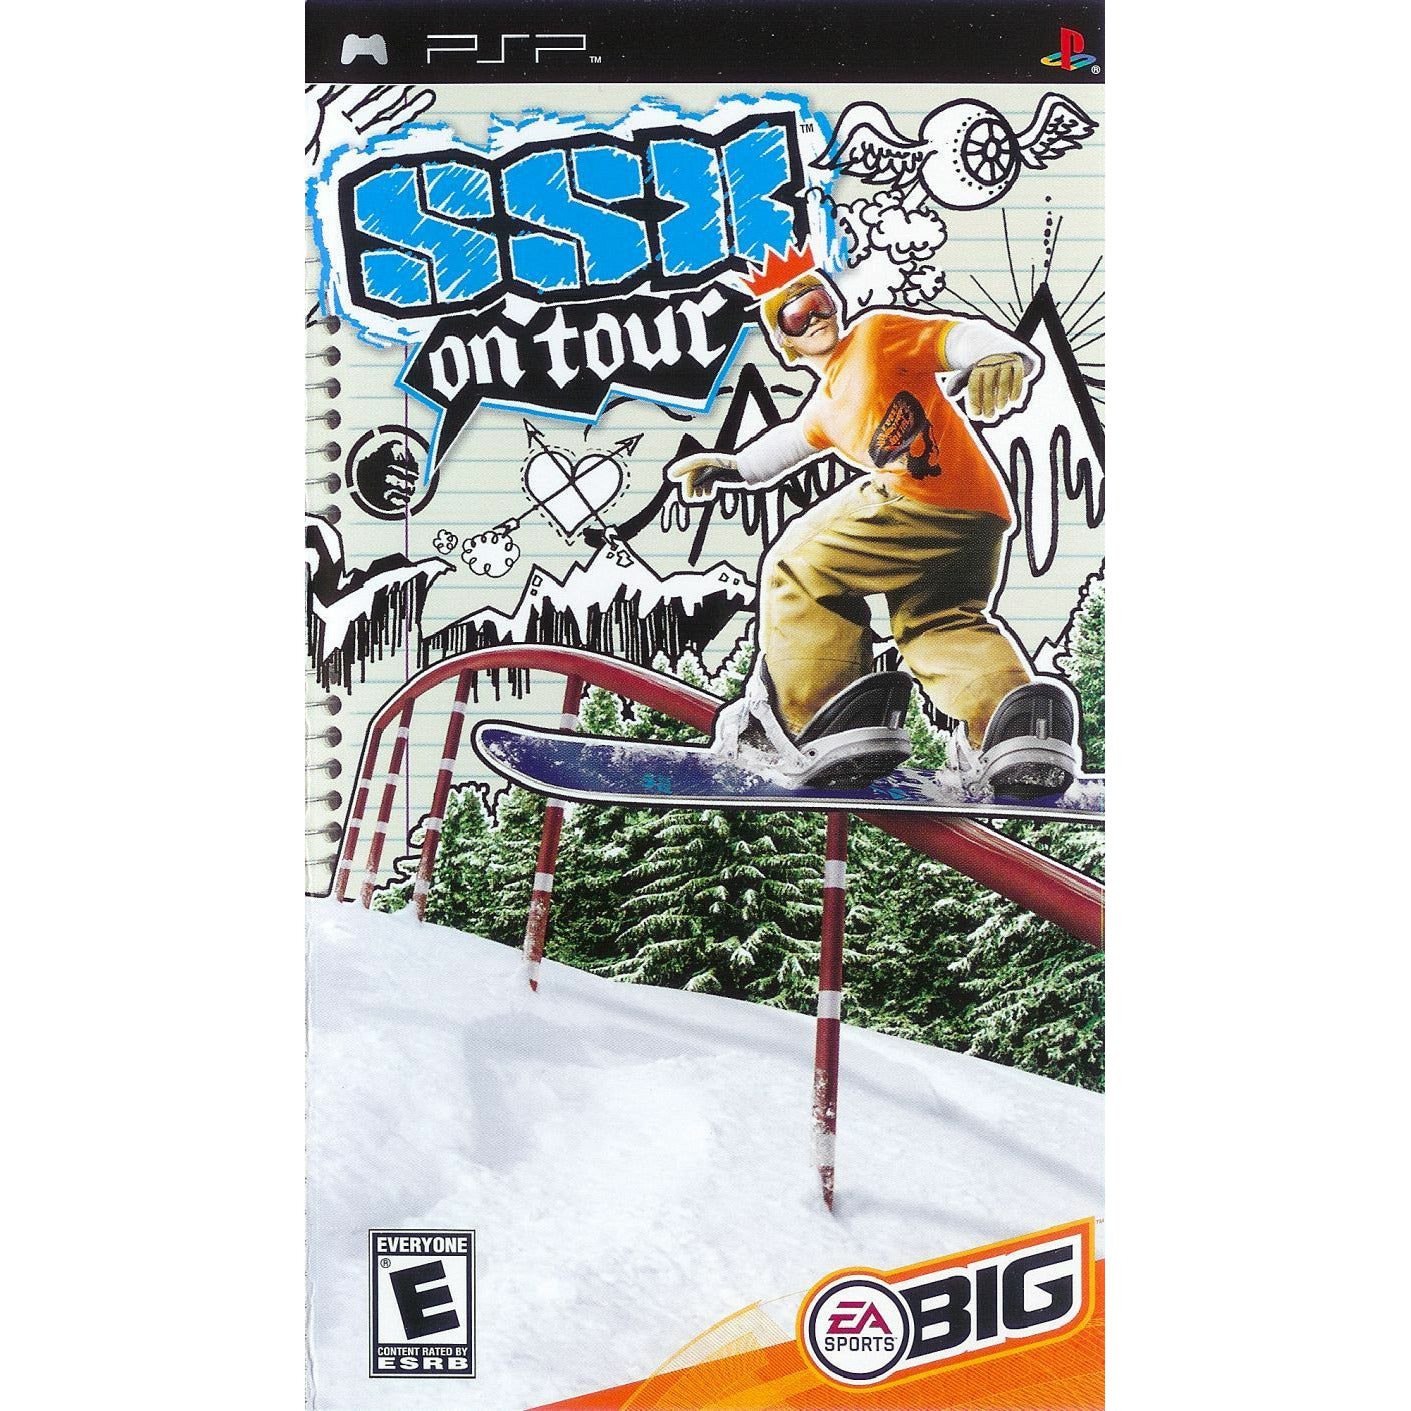 PSP - SSX On Tour (In Case)